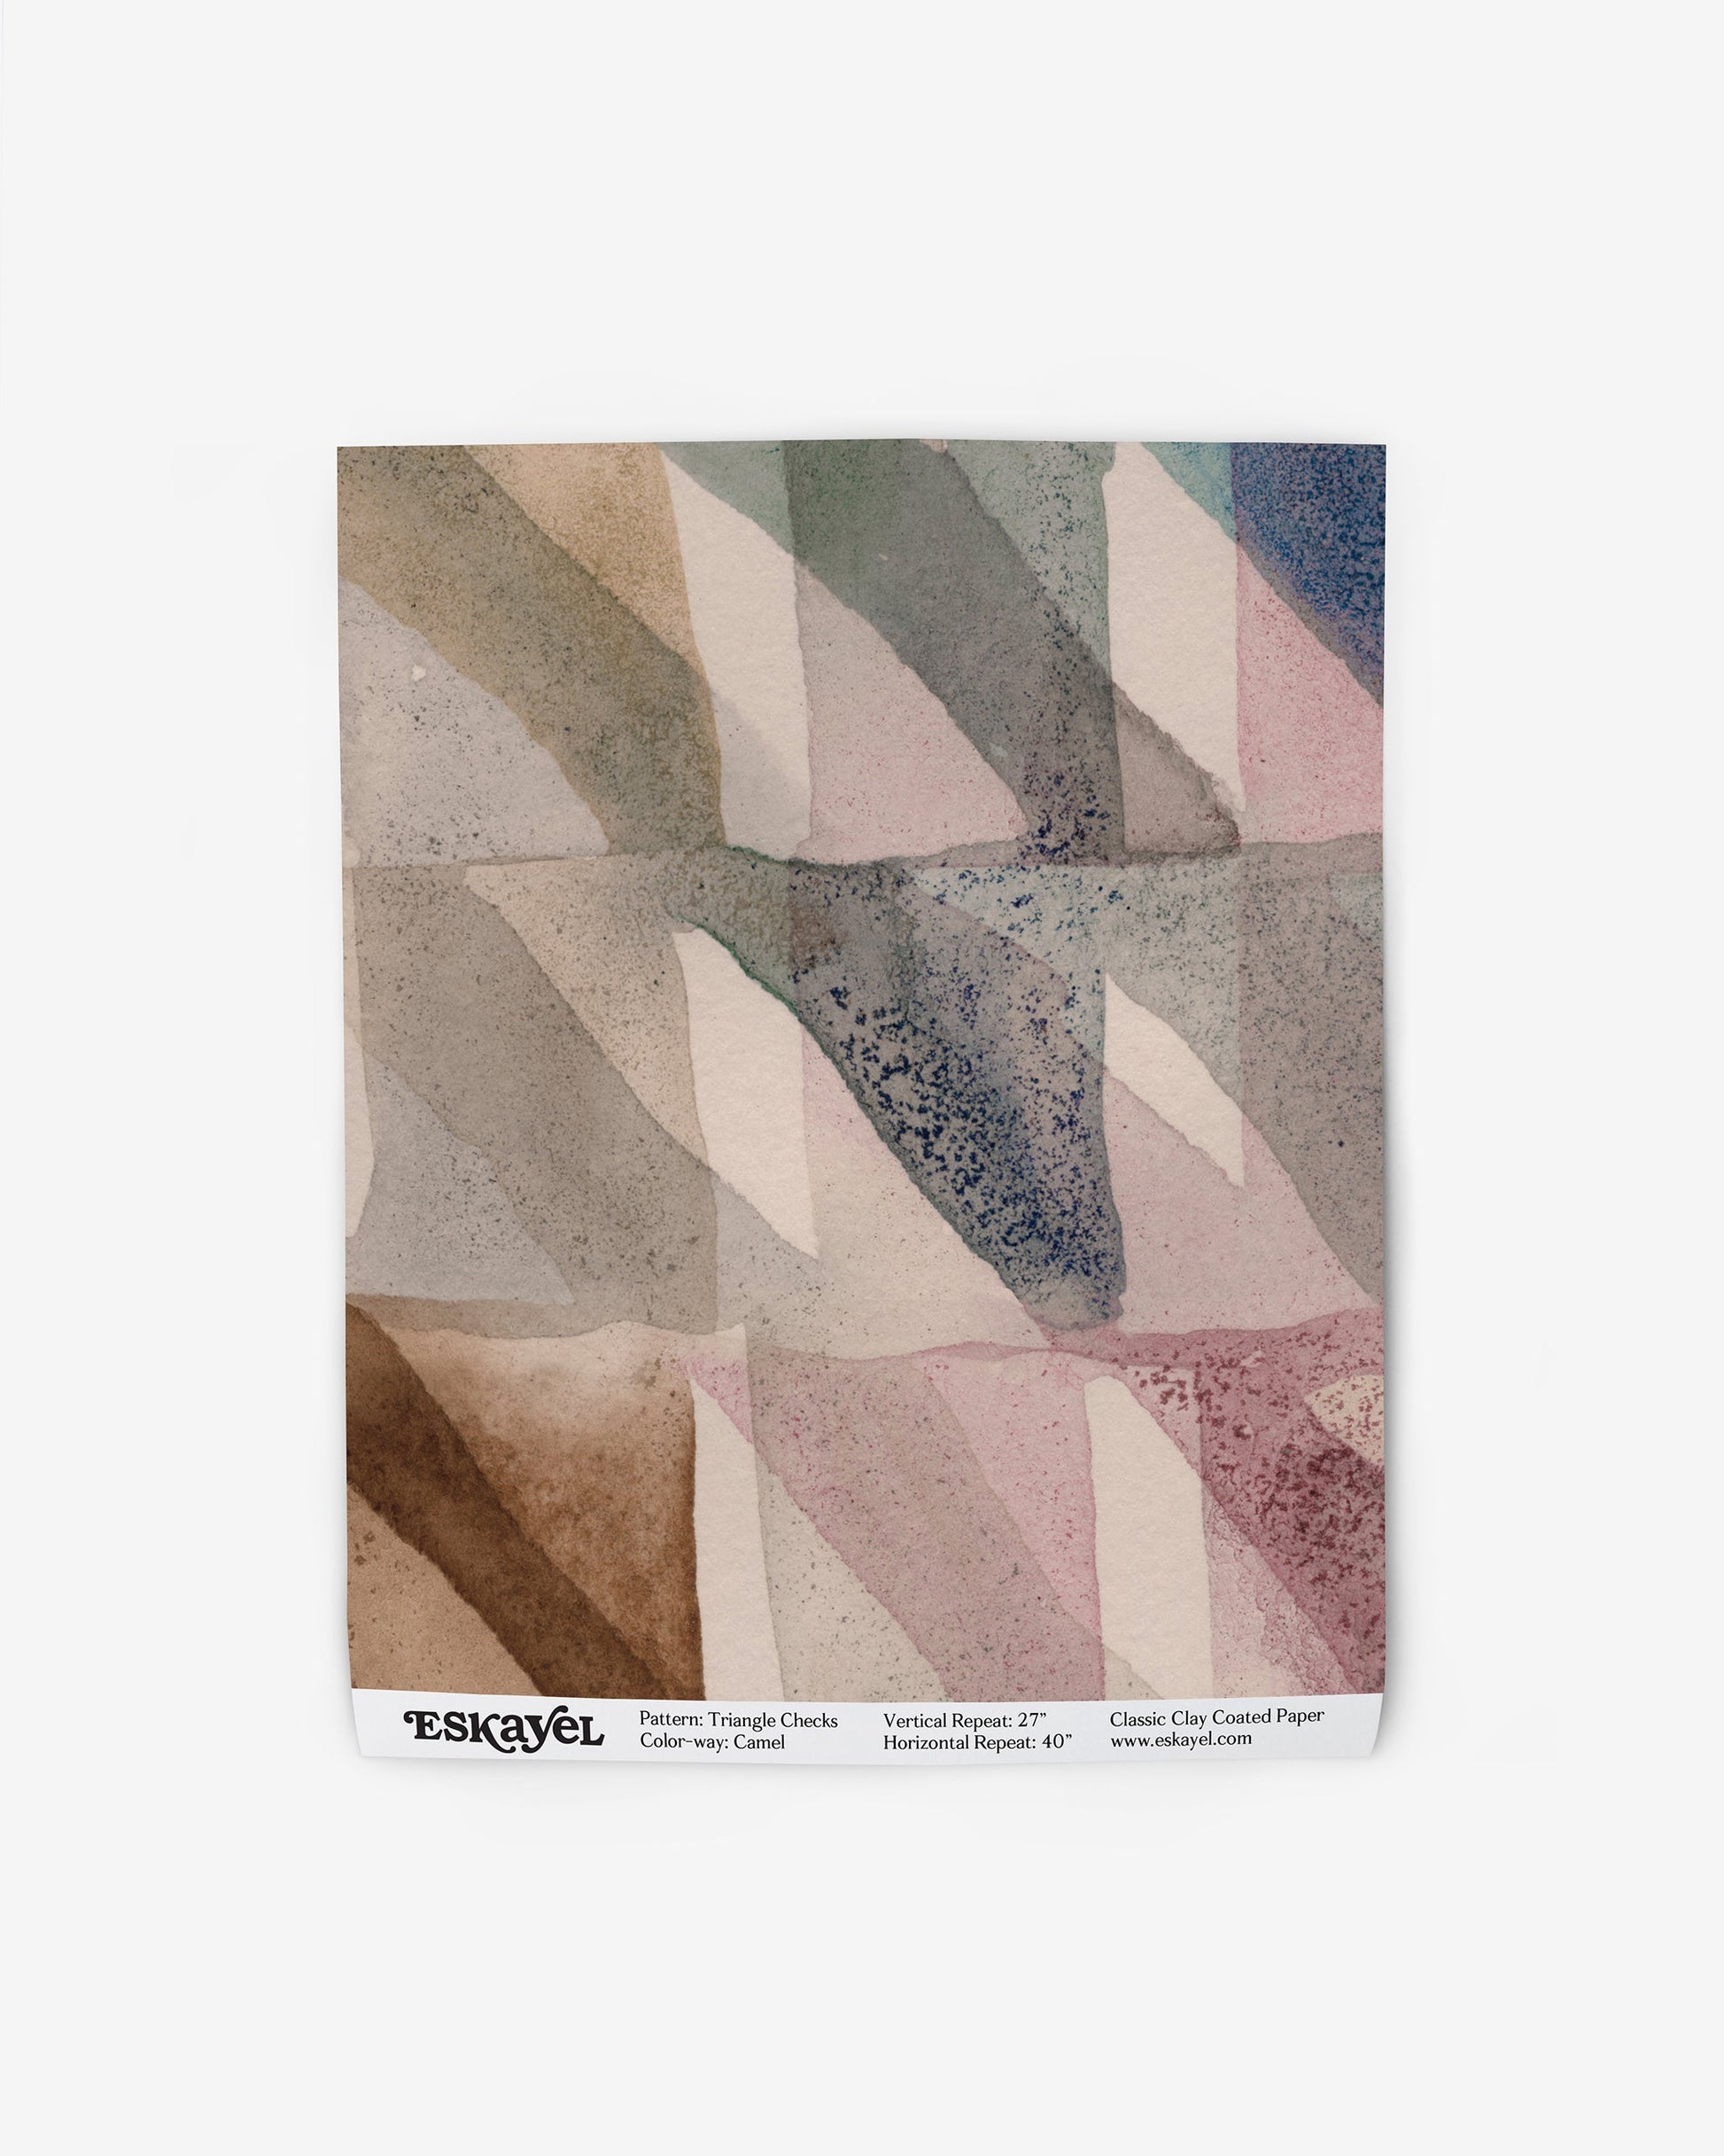 You can now a sample of the Triangle Checks Wallpaper Sample Camel with a geometric pattern on it